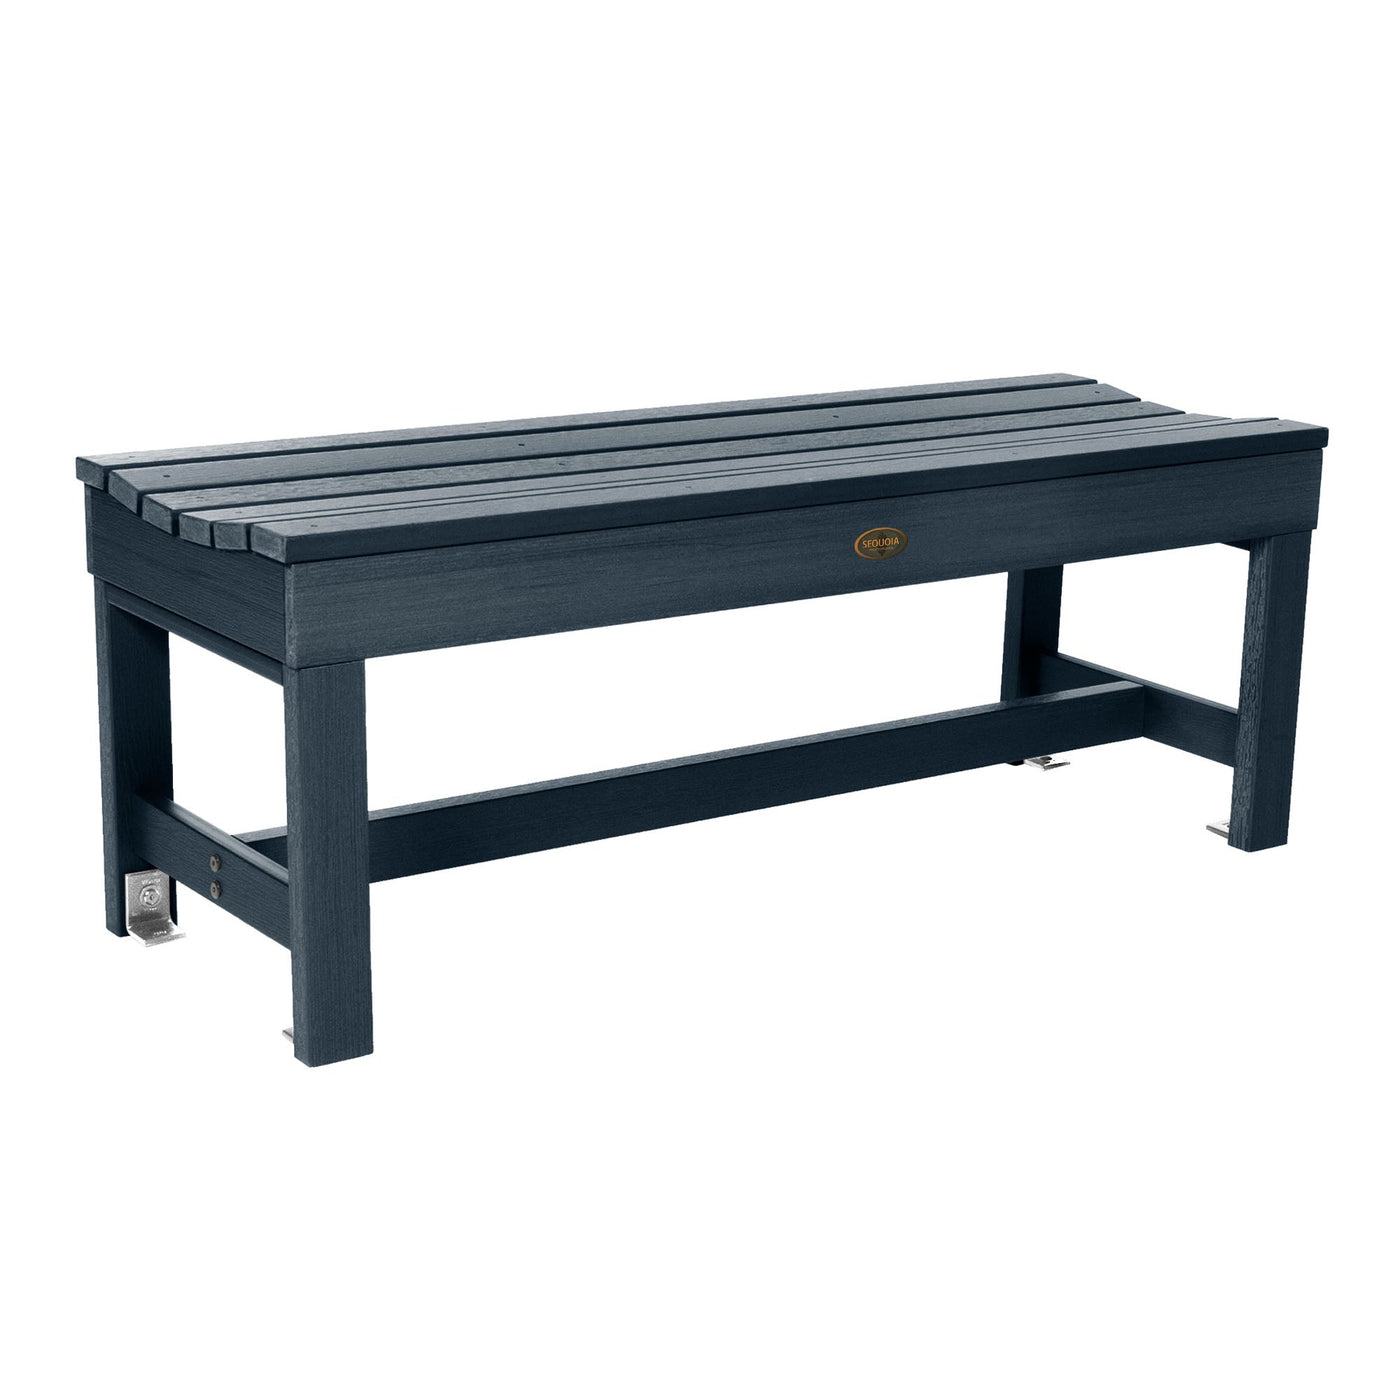 Commercial Grade "Weldon" 4ft Backless Bench Bench Sequoia Professional Federal Blue 